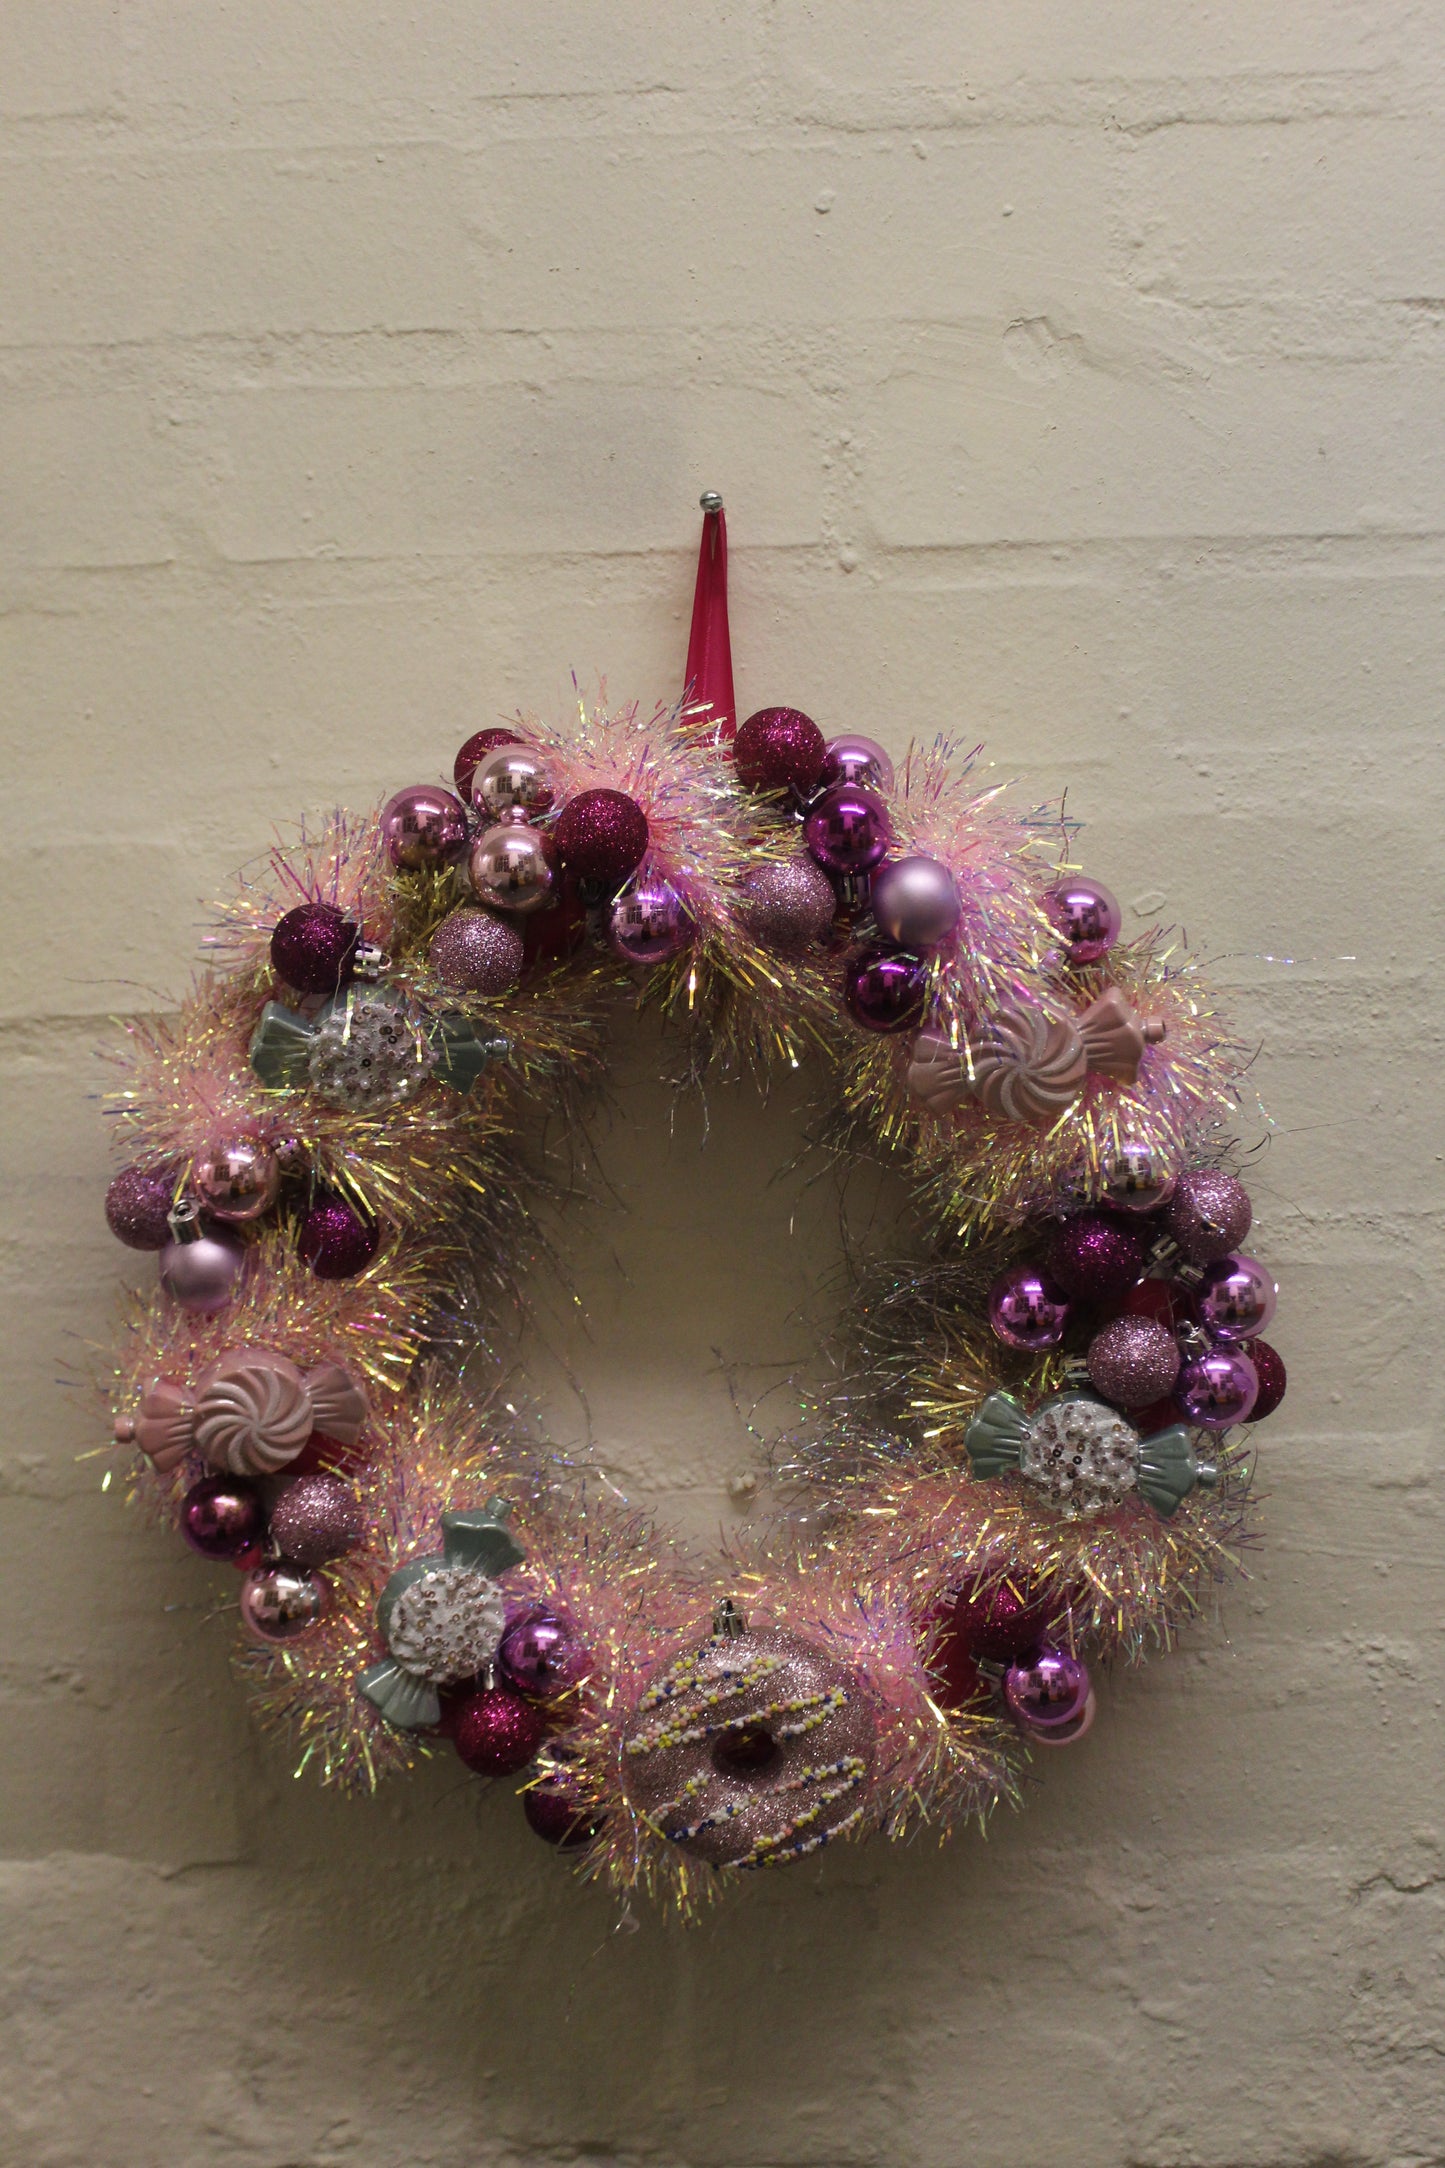 Kitsch Maximalist Candy and Donut themed Christmas wreath